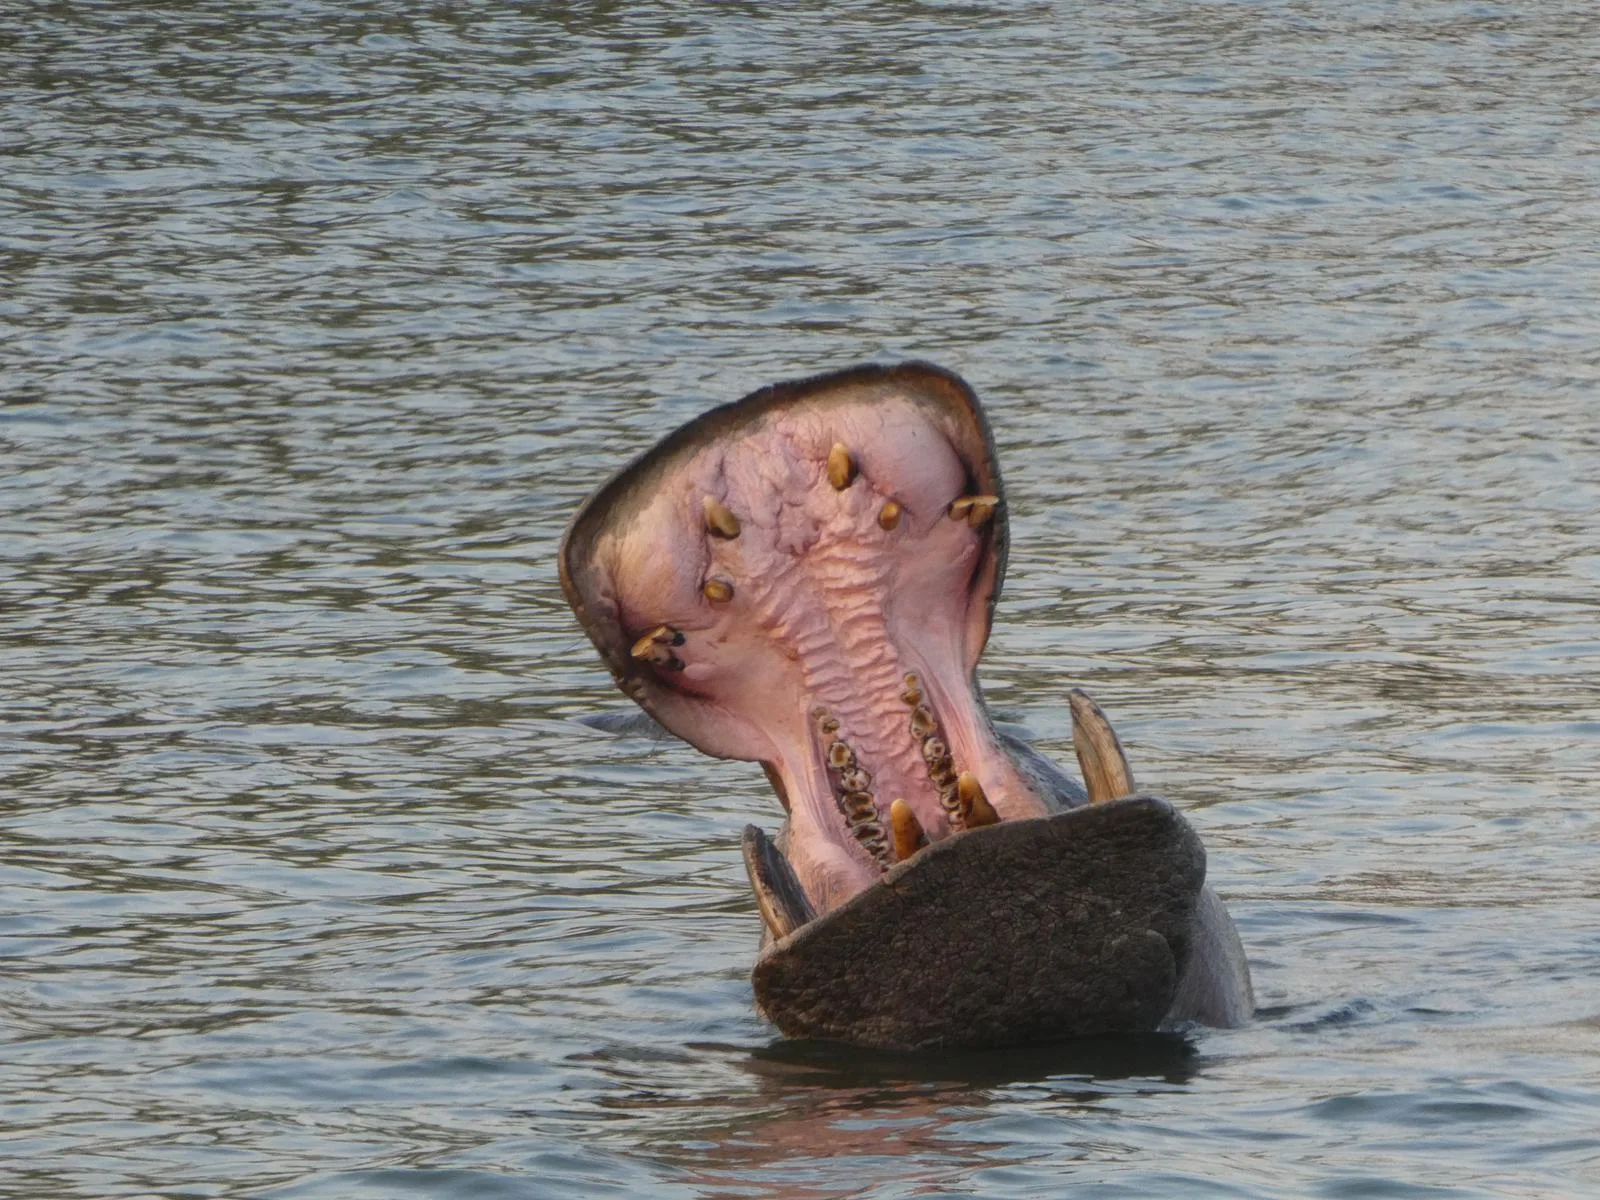 Real traveller photo of hippo in water in the Saint Lucia Estuary Day 7, South Africa & Victoria Falls Approach Tour